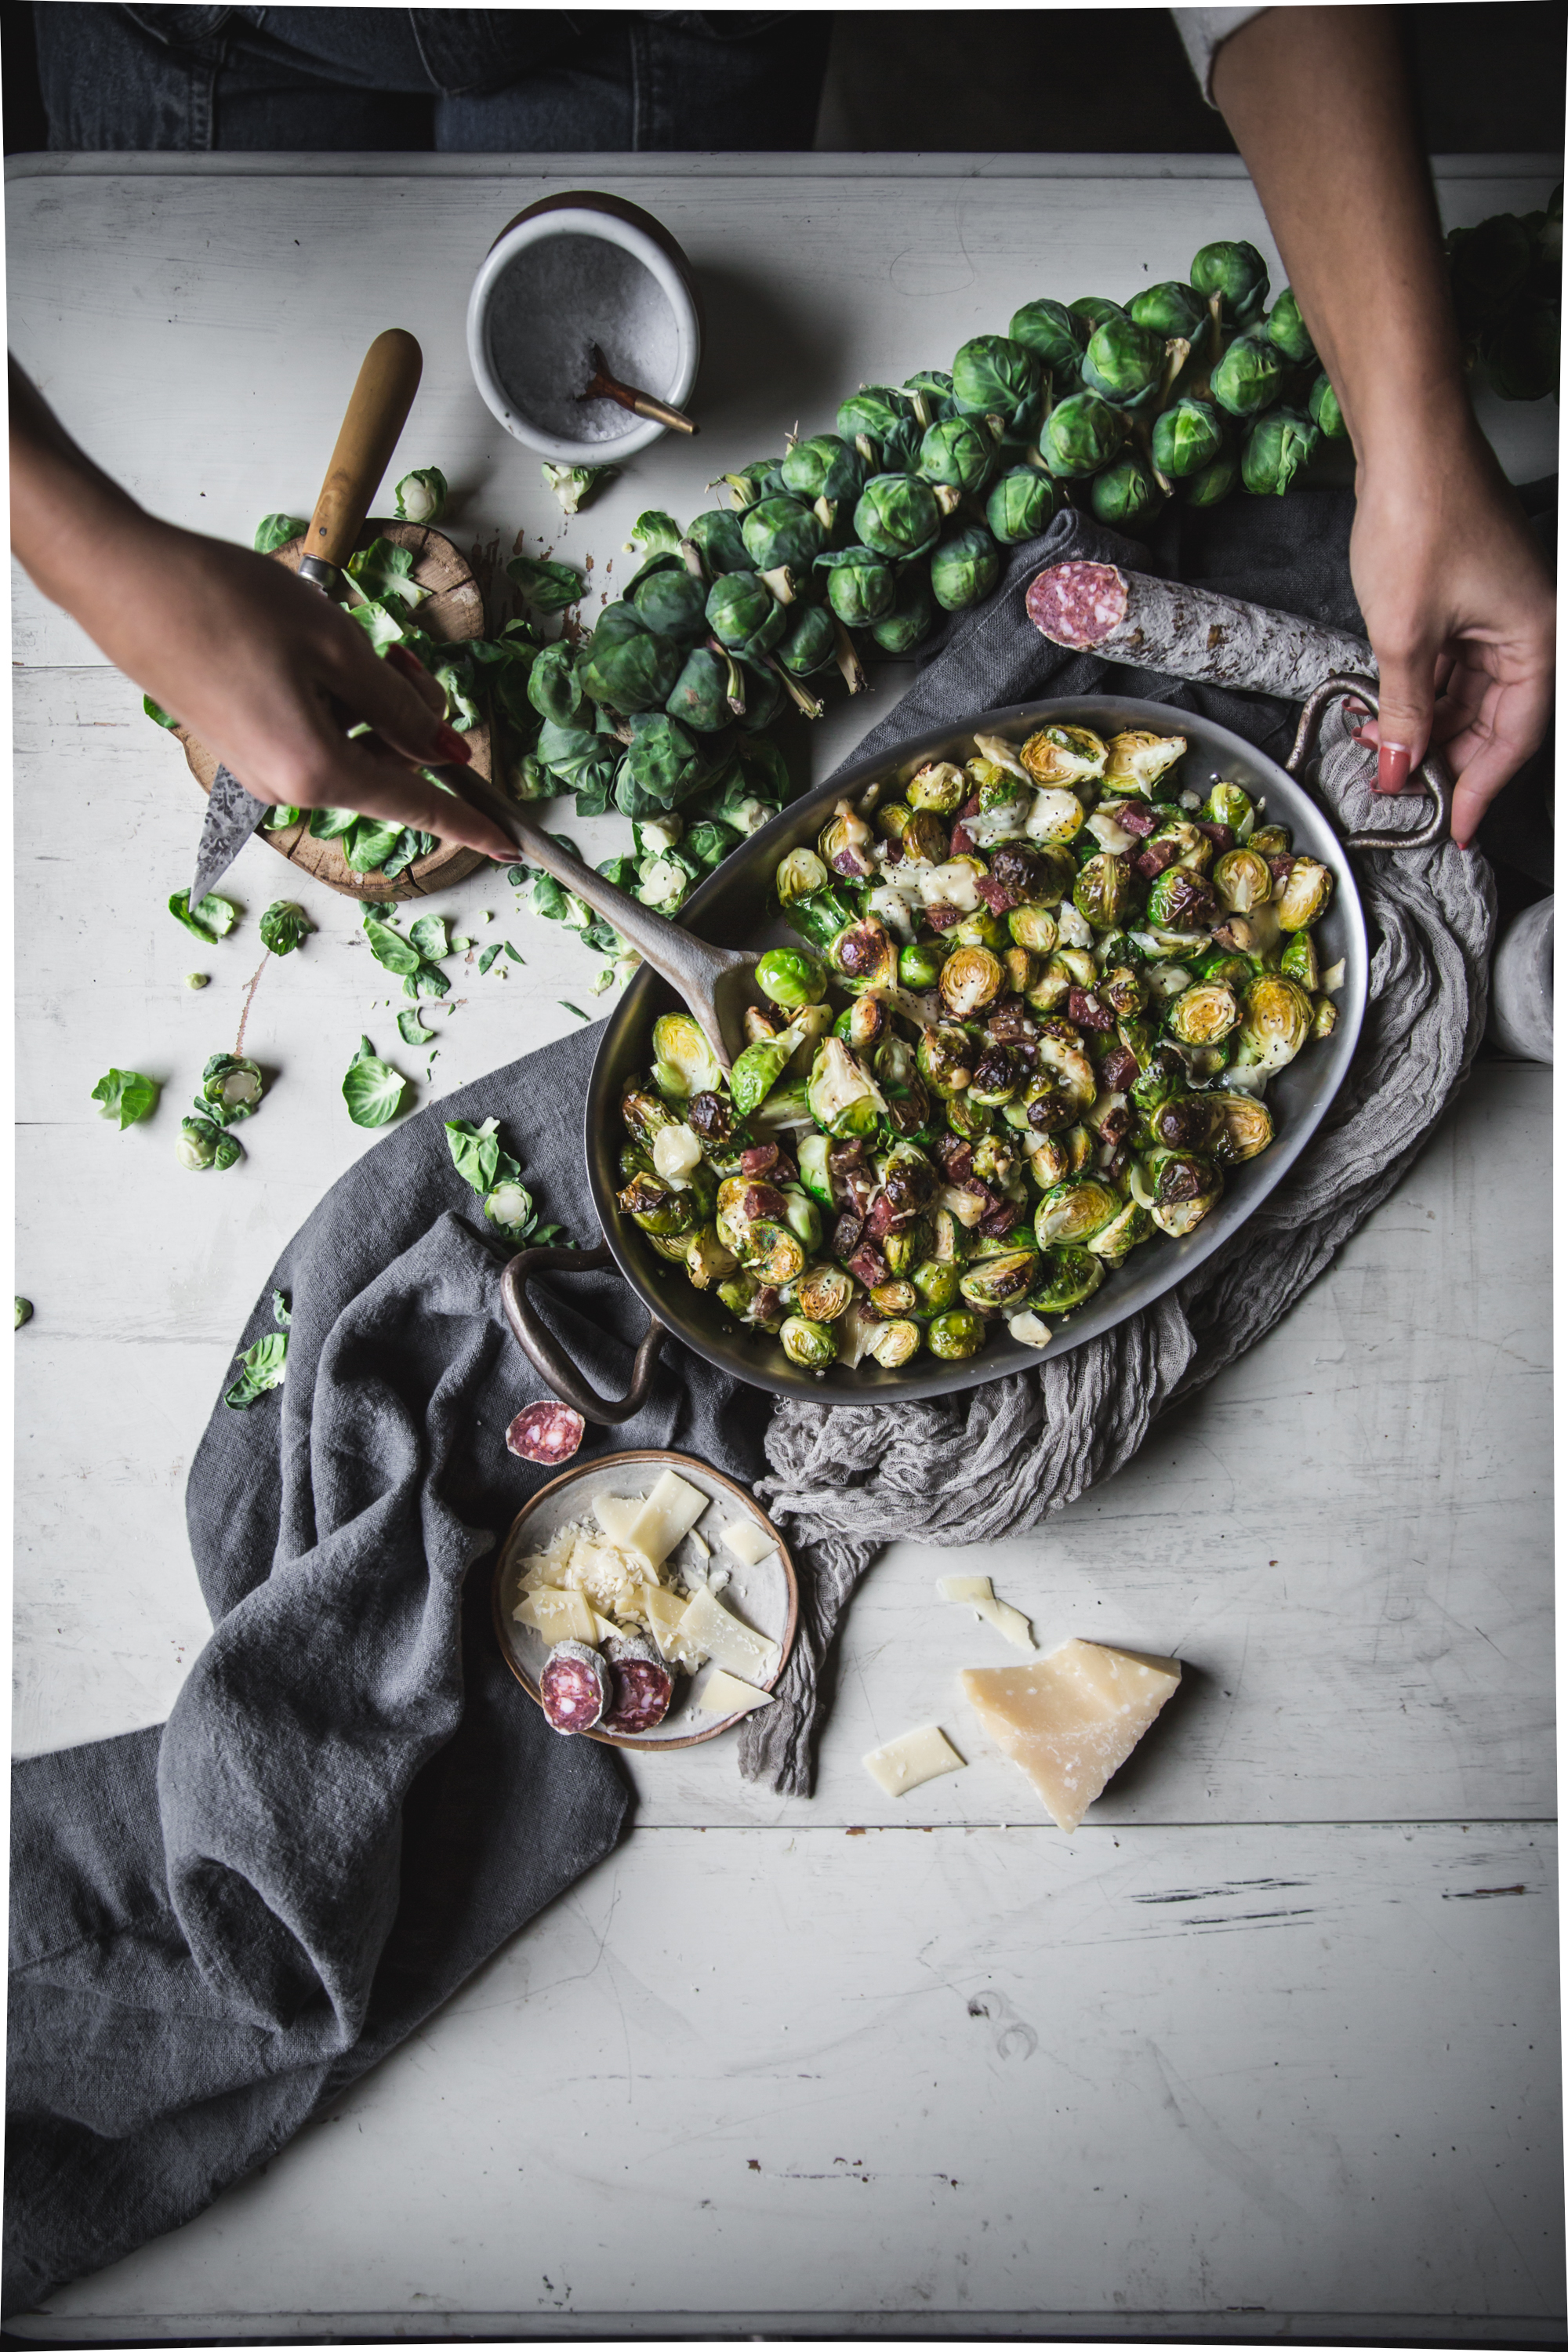 How to Make Roasted Brussel Sprouts by Eva Kosmas Flores